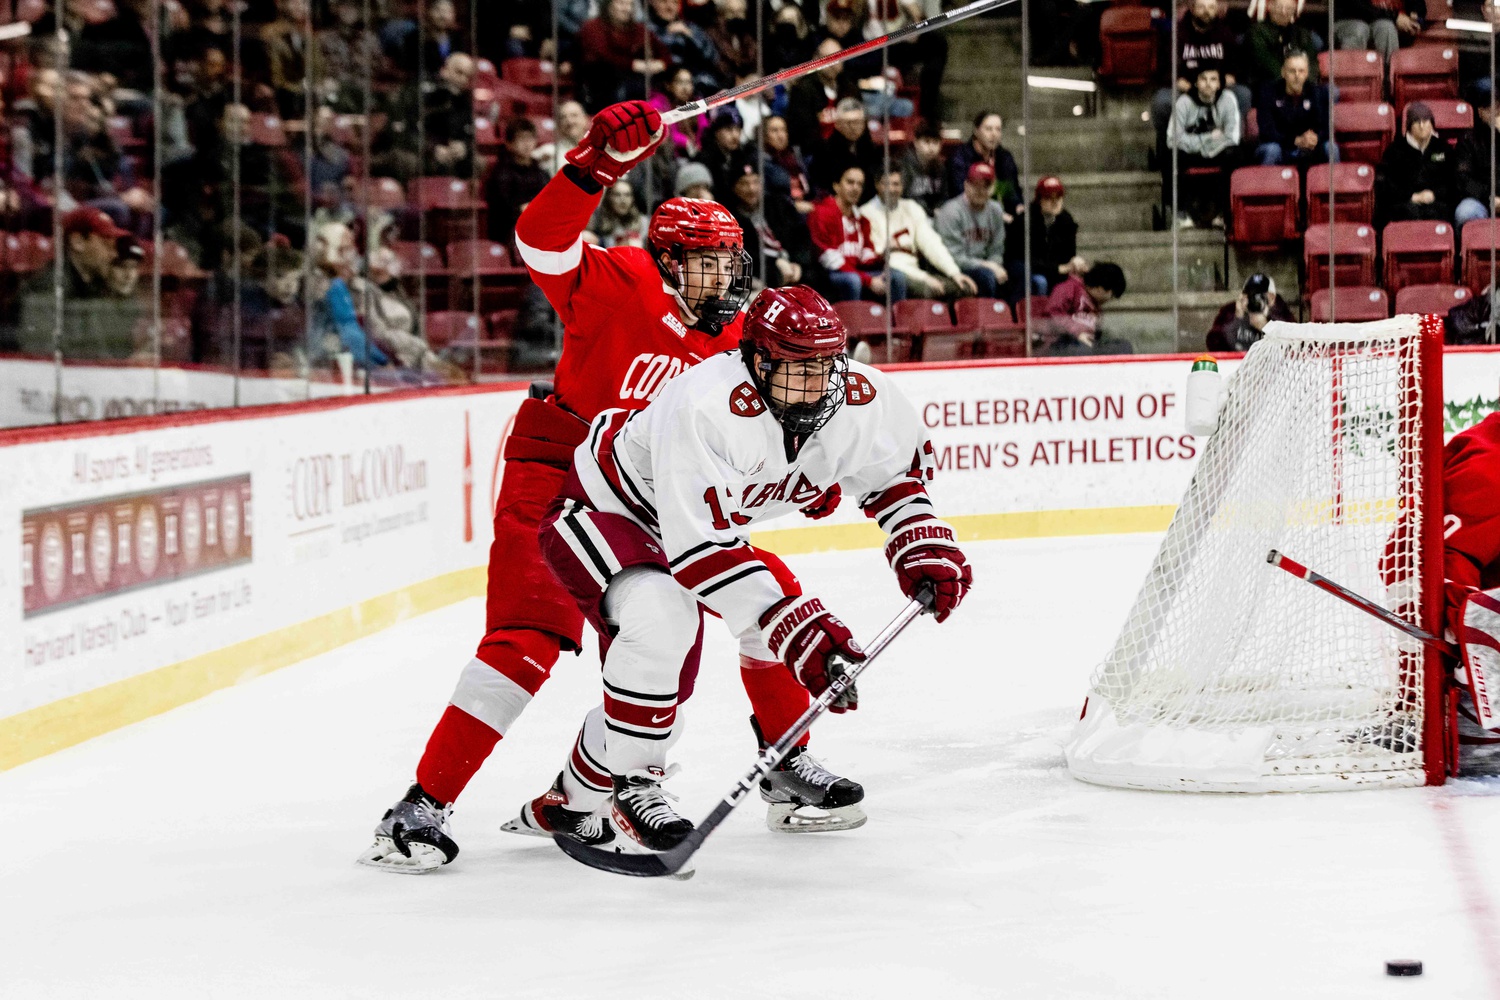 Then-first-year forward Marek Hejduk fights through the Cornell defense at home on January 28.